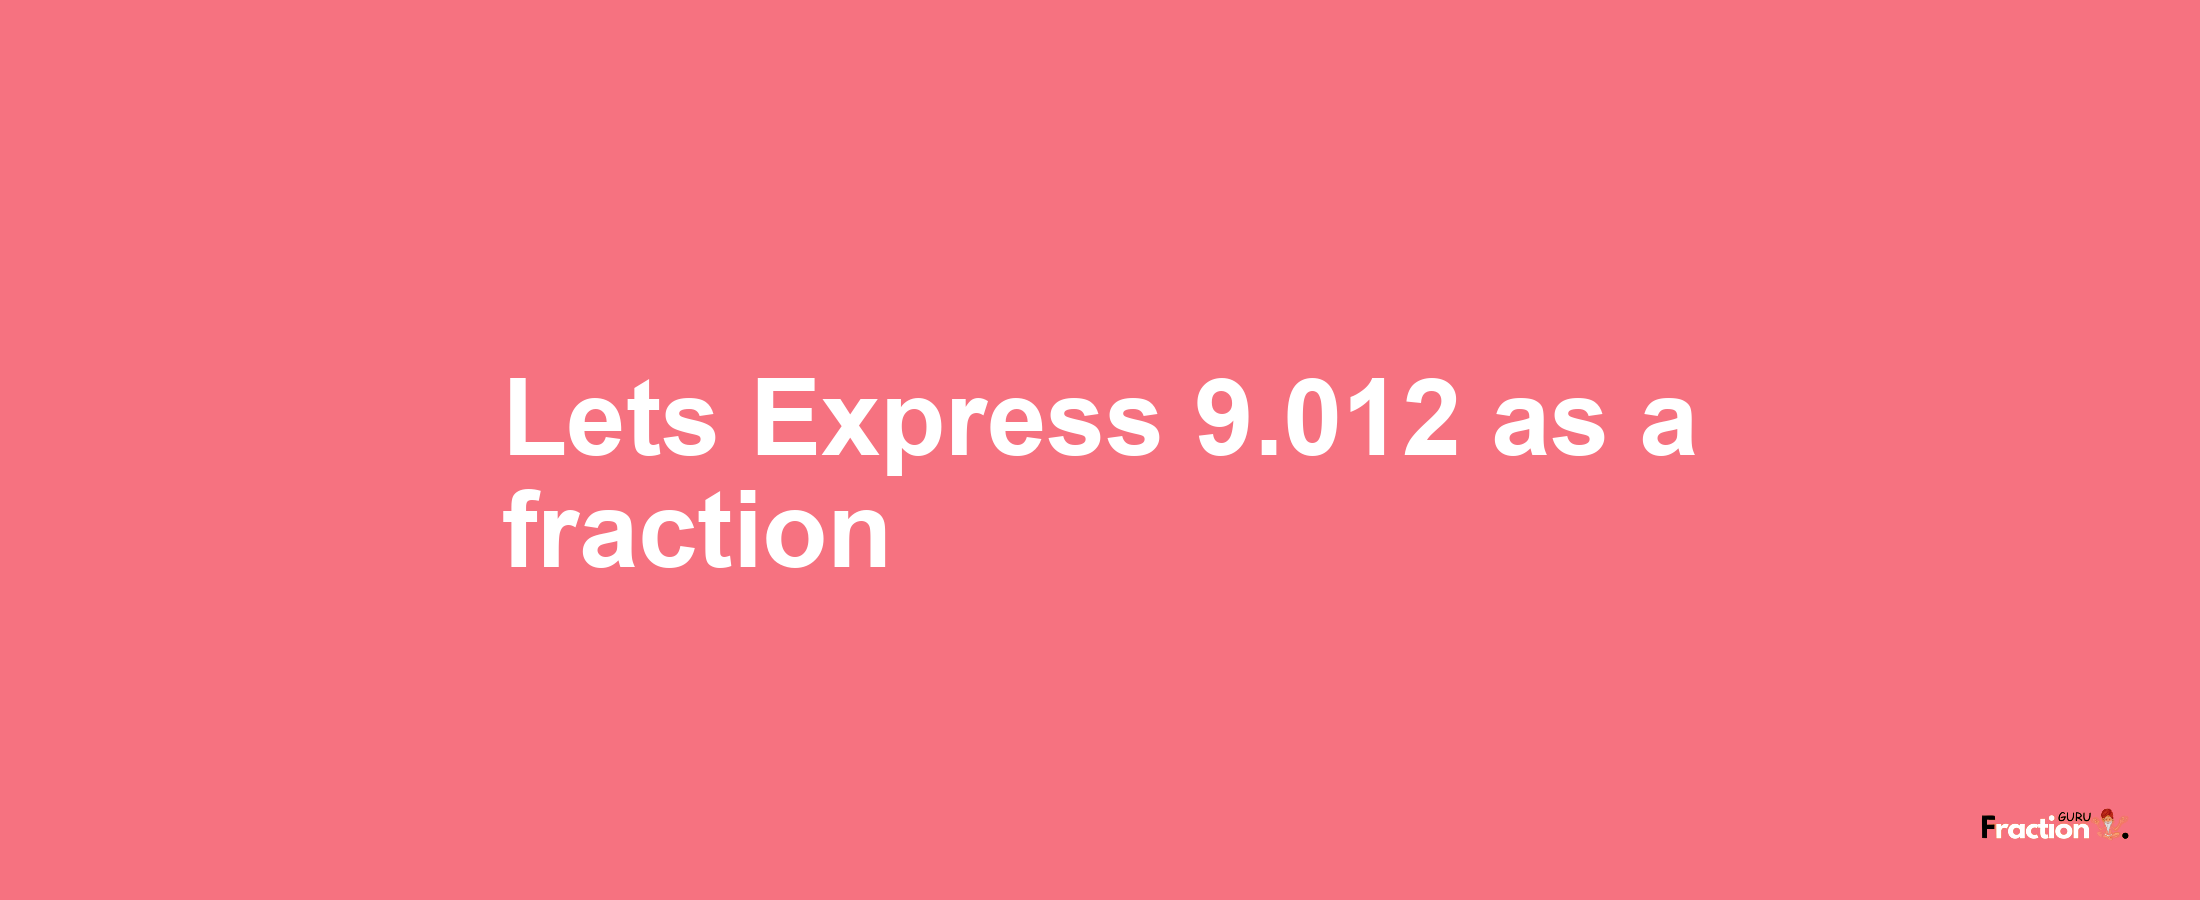 Lets Express 9.012 as afraction